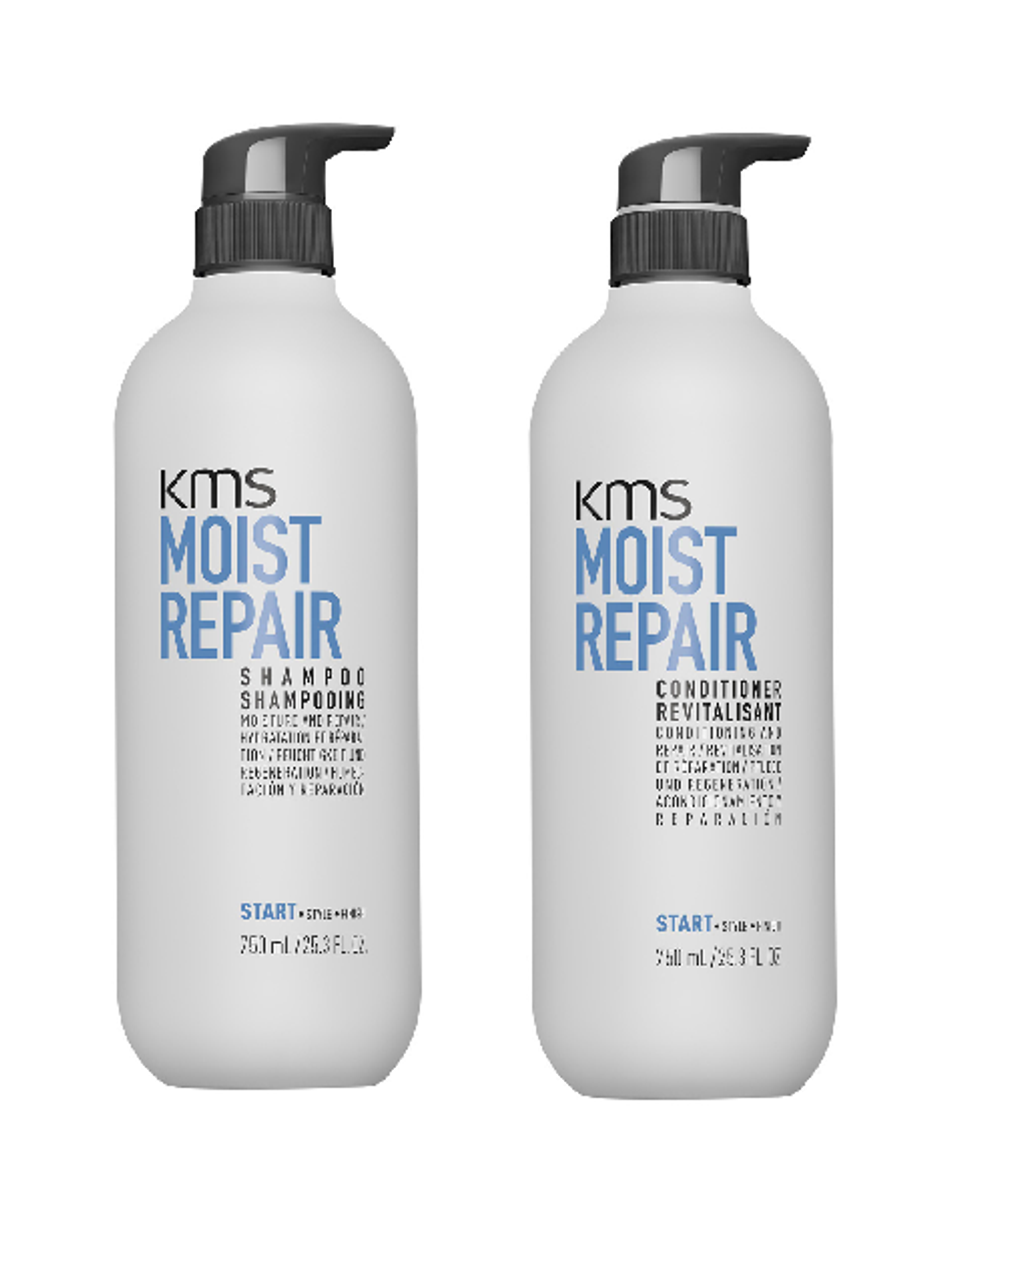 KMS MOISTREPAIR Shampoo and Conditioner Duo 25.3oz - N Beauty Salon & Supply